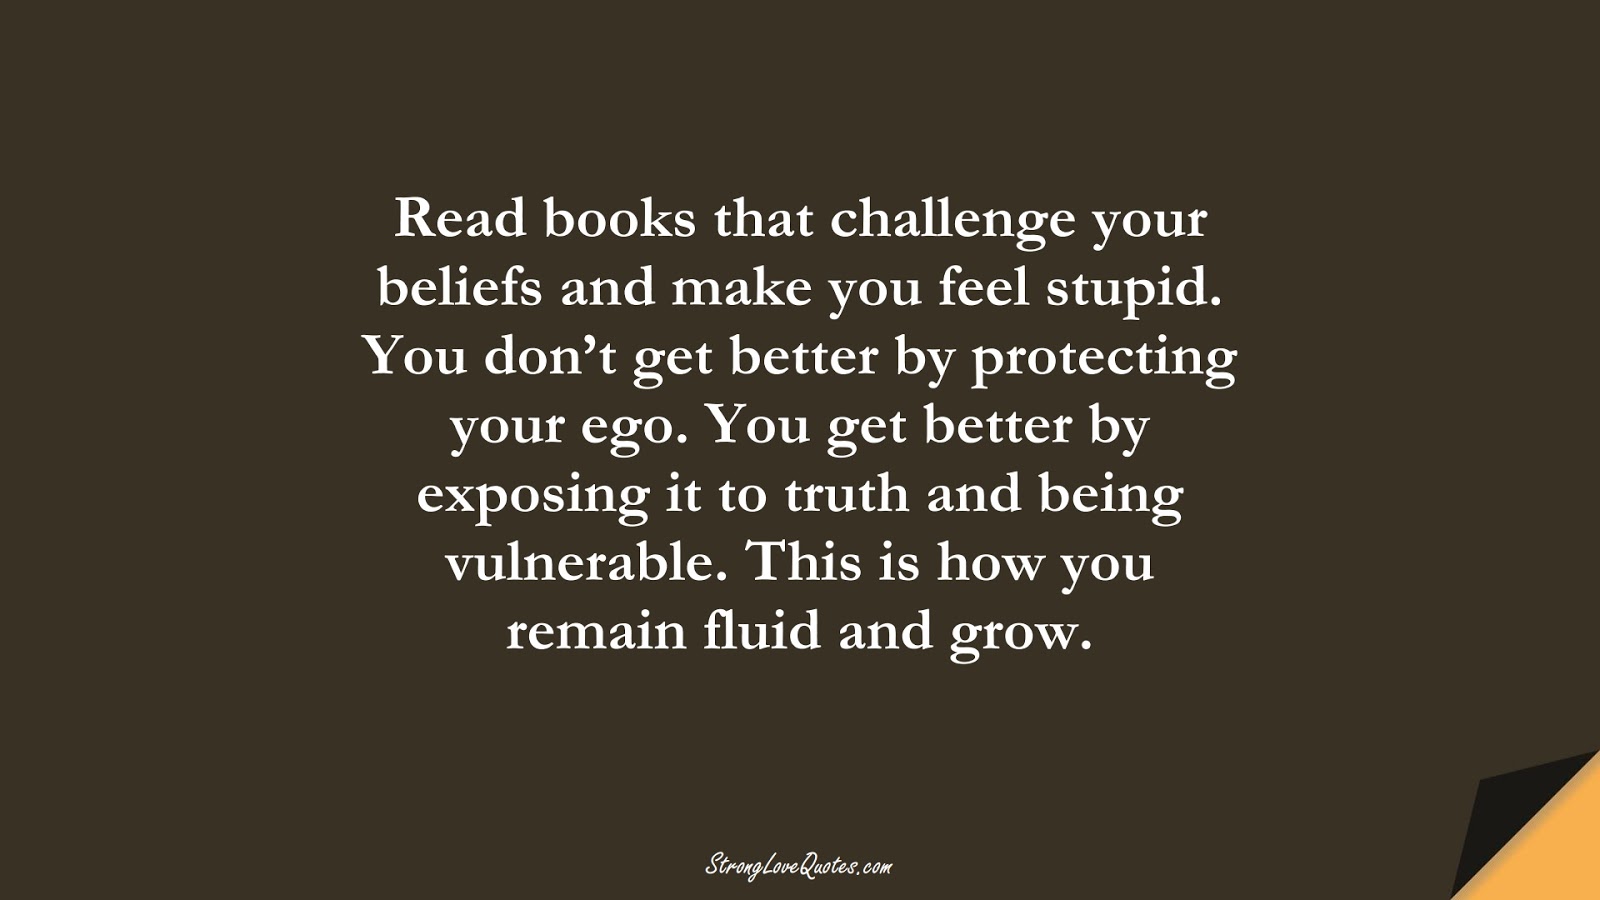 Read books that challenge your beliefs and make you feel stupid. You don’t get better by protecting your ego. You get better by exposing it to truth and being vulnerable. This is how you remain fluid and grow.FALSE